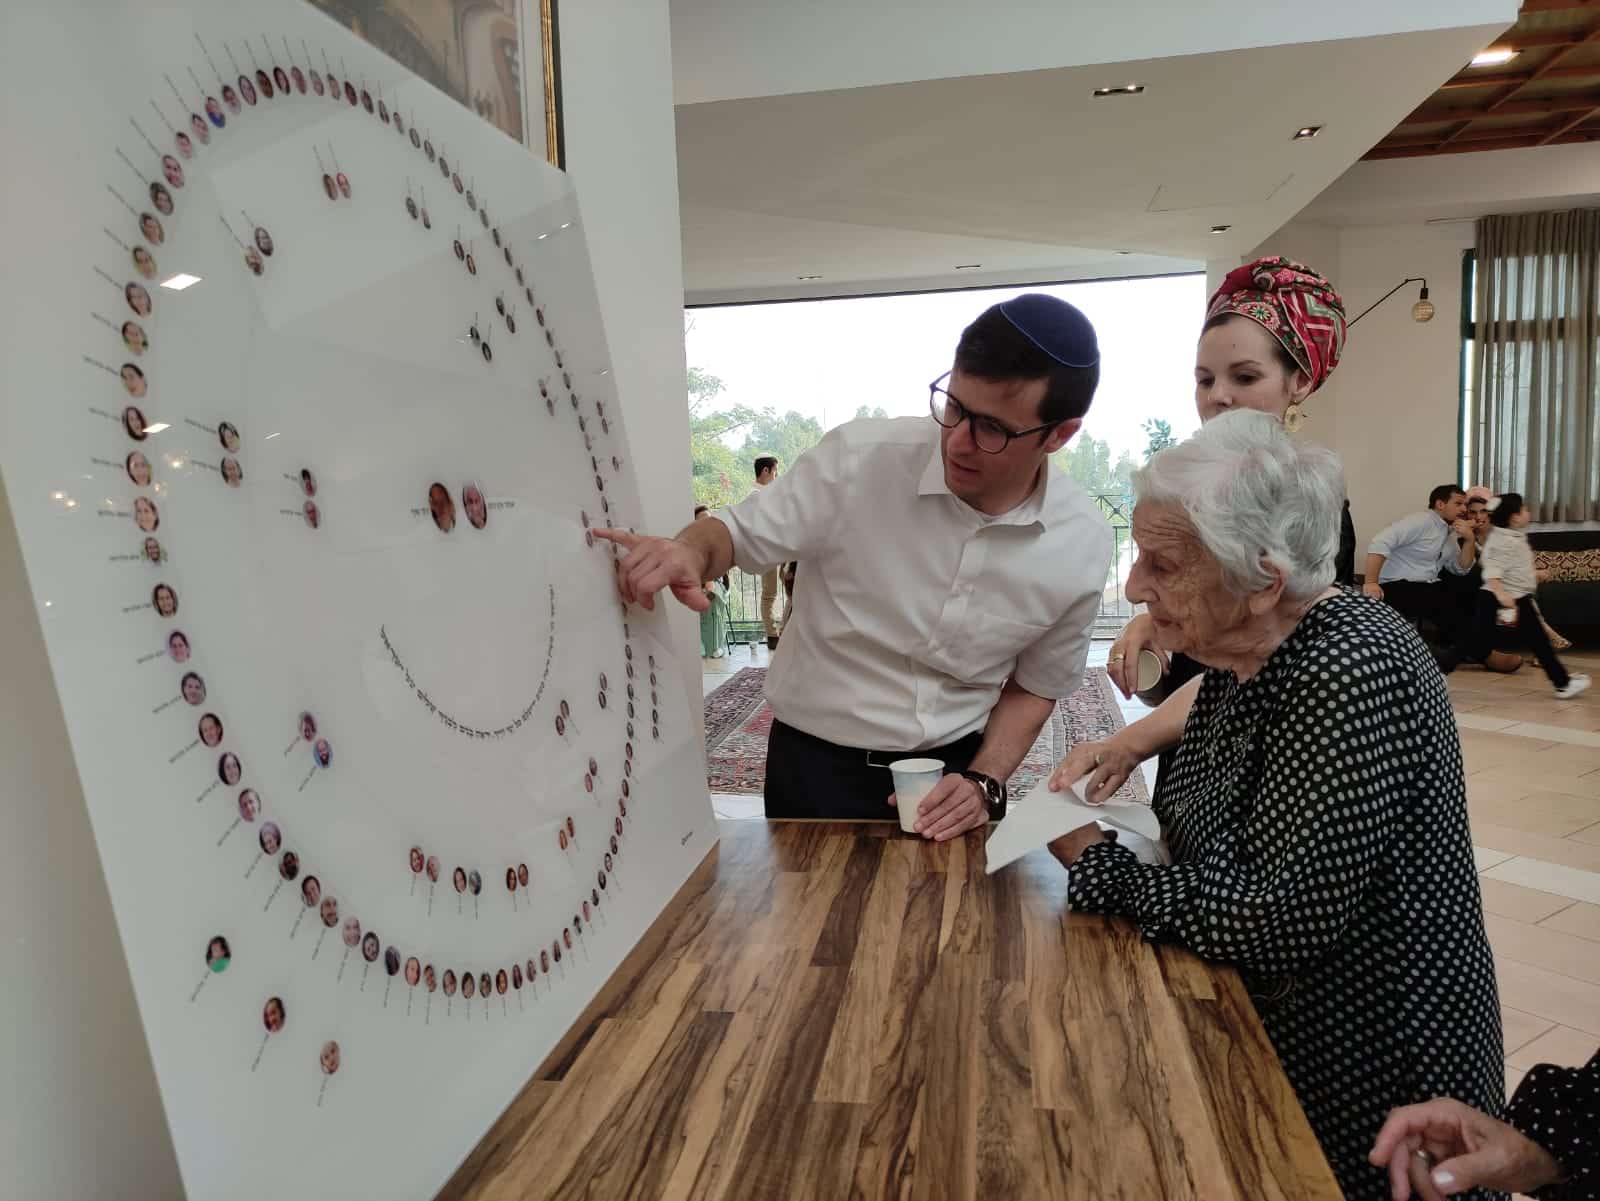 Ester looking at her descendants’ sun chart. A fantastic way to present a family tree at a family reunion